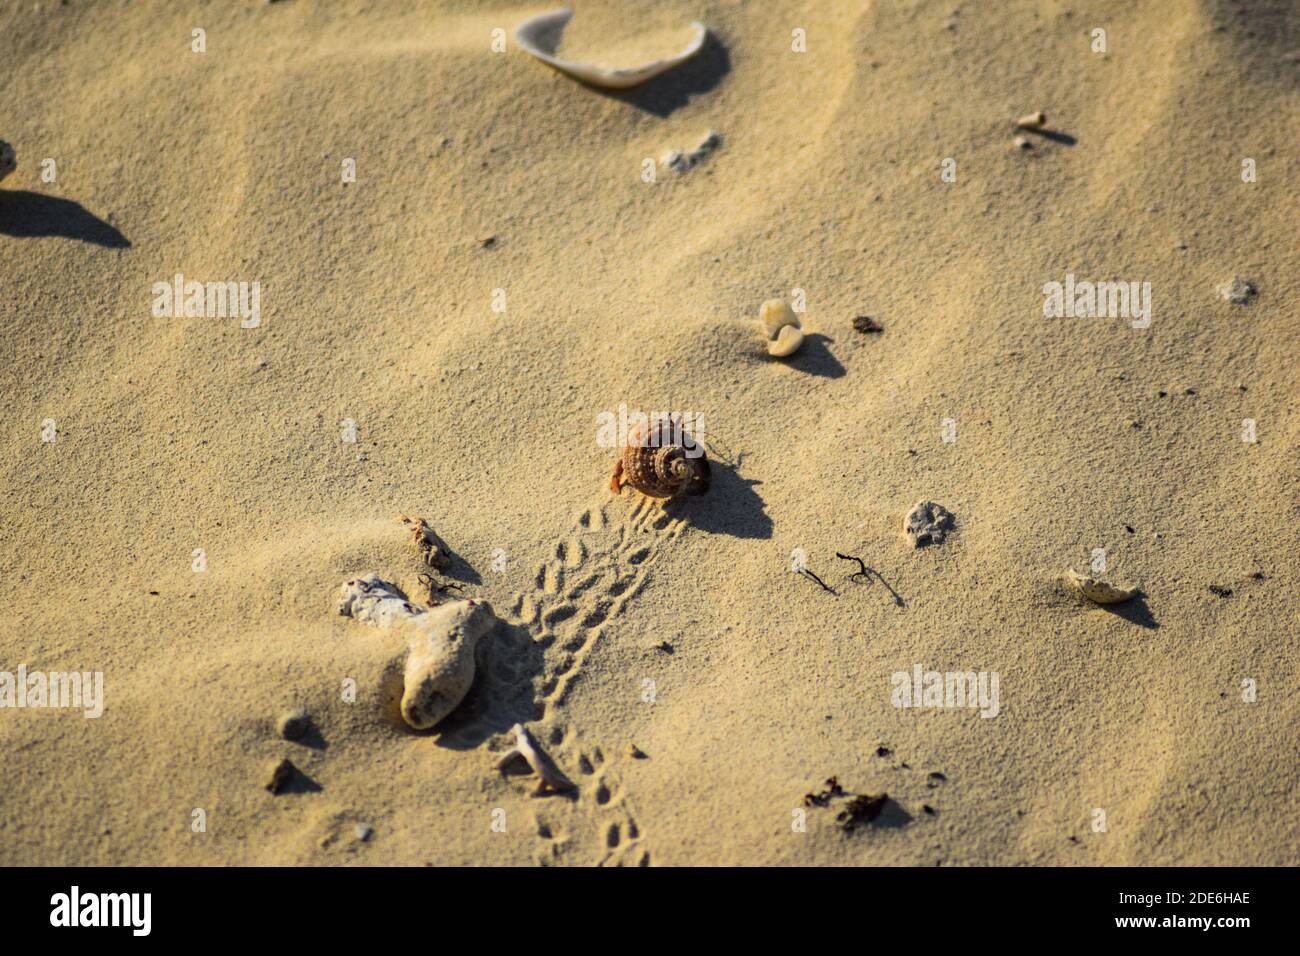 Hermit crab crossing a sun baked beach in Cuba Stock Photo